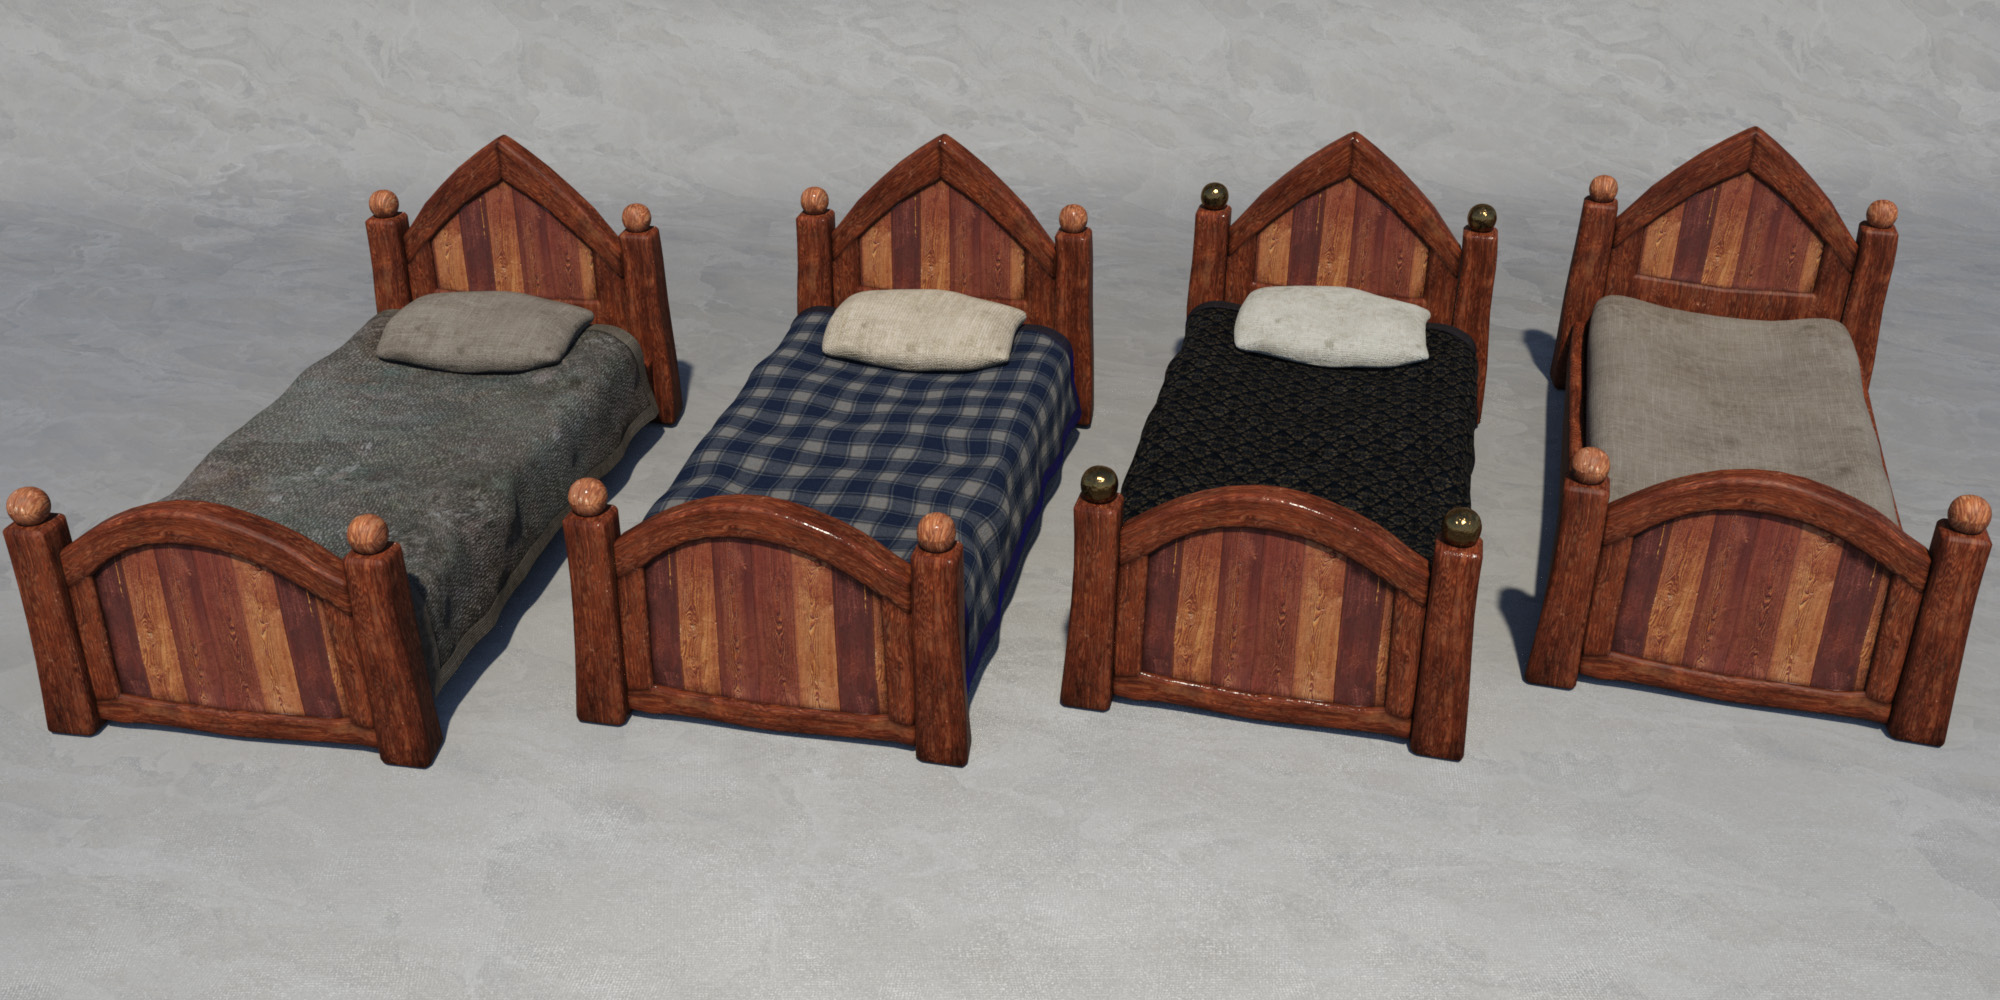 Fairytale Furniture by: The Alchemist, 3D Models by Daz 3D